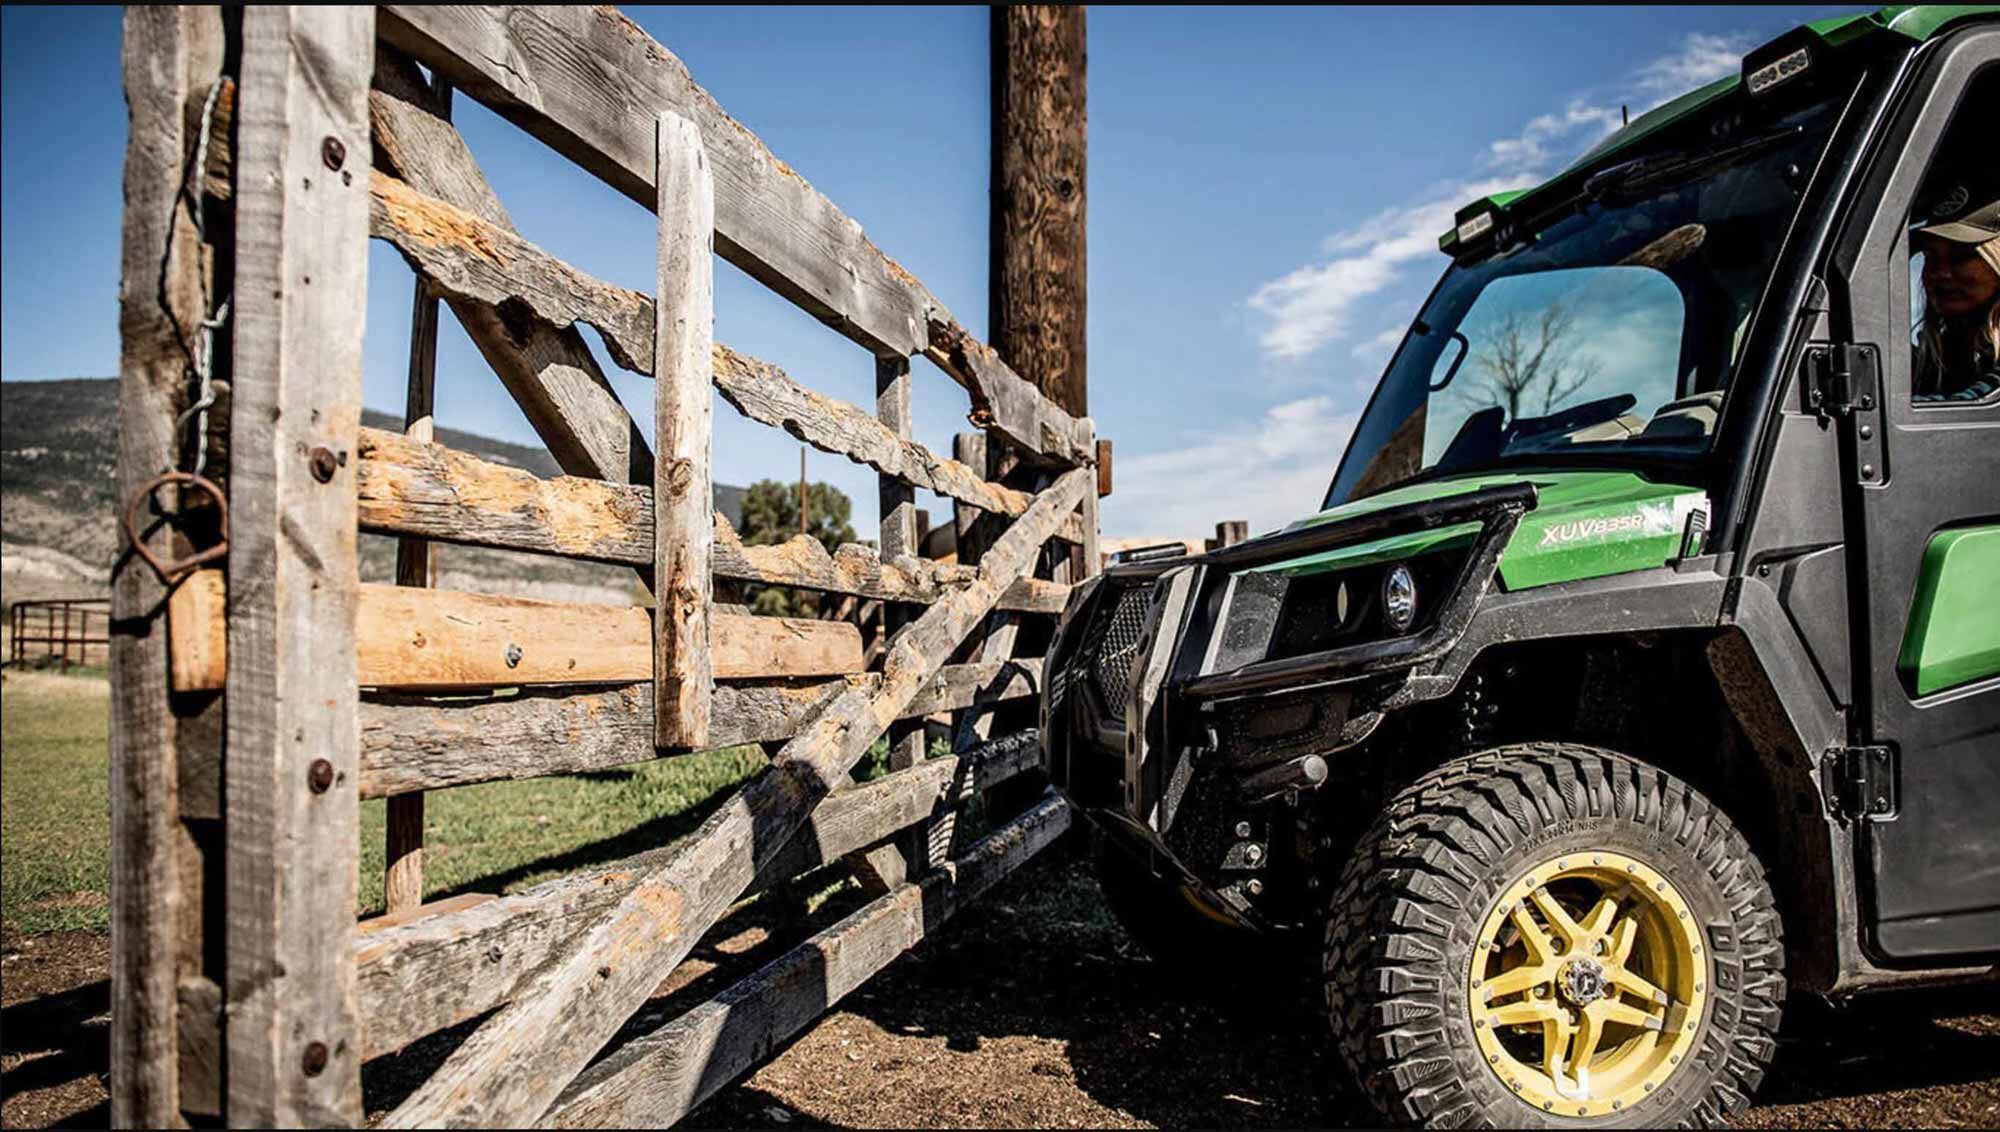 It might be luxurious, but make no mistake: The 2022 John Deere XUV835R Signature Edition is made for work.